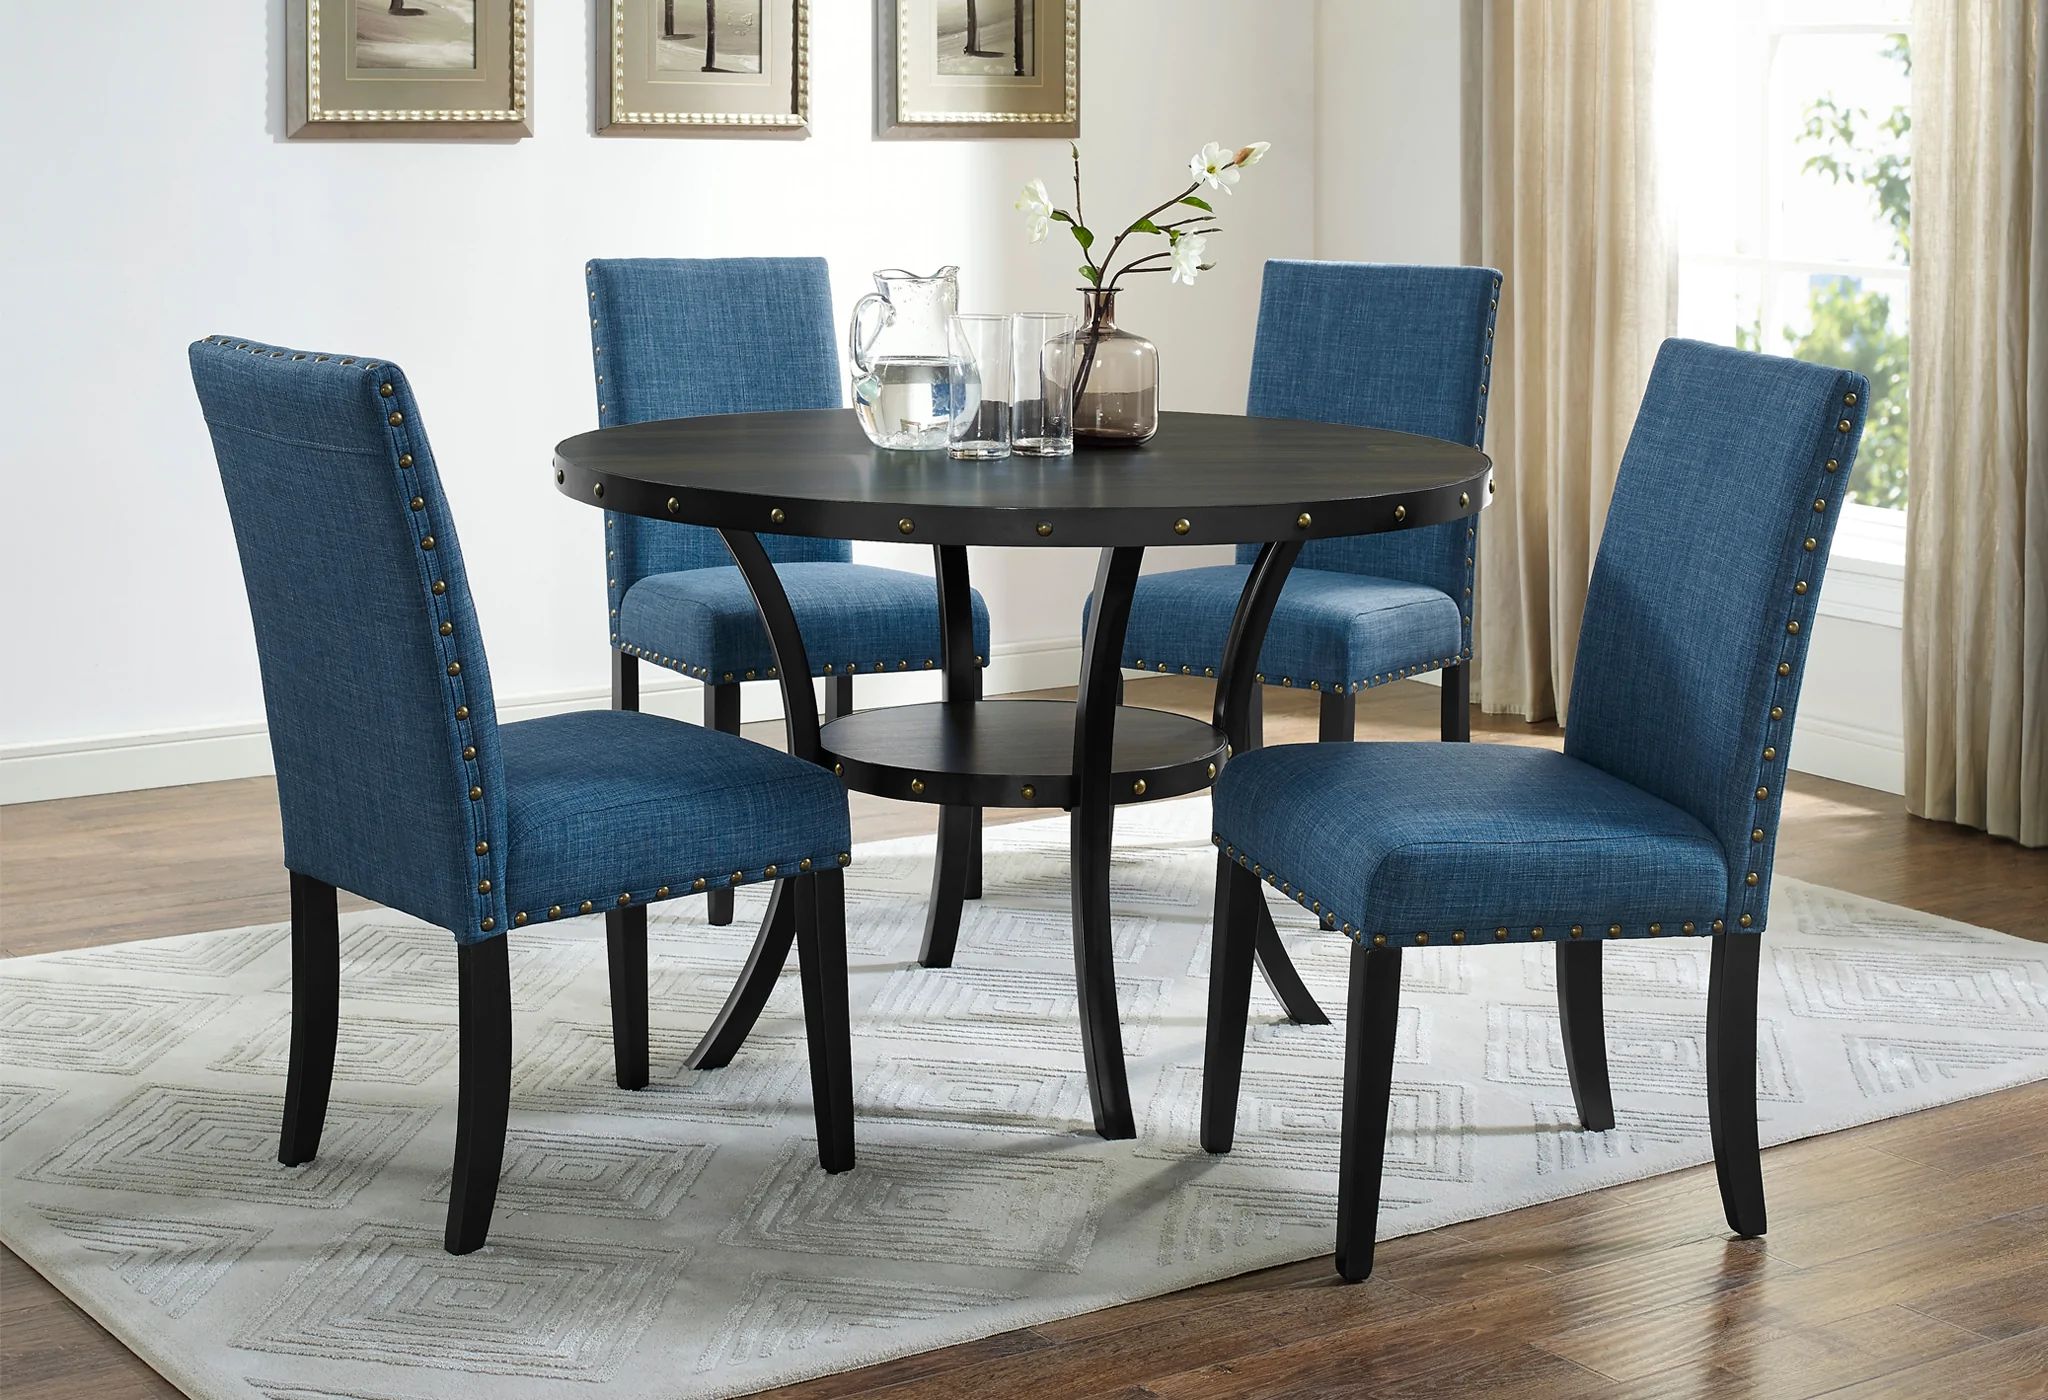 Crispin Dining Collection